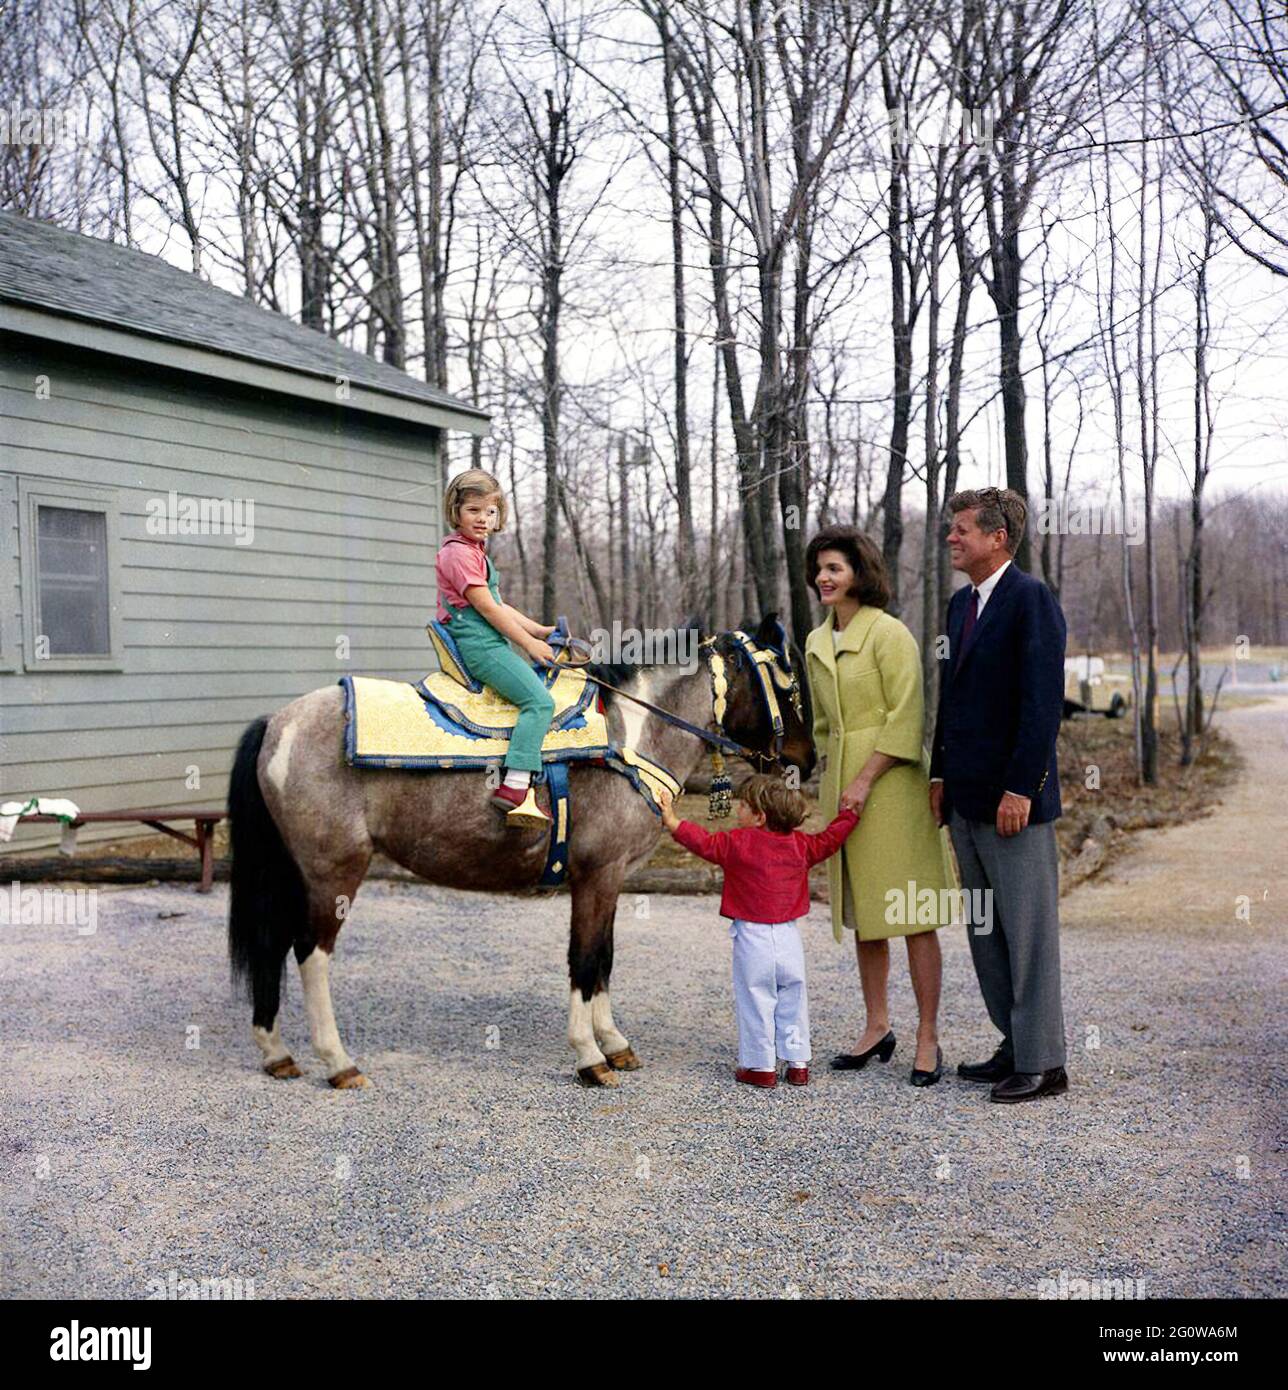 KN-C27672    31 March 1963  Weekend at Camp David. President John F. Kennedy and family watch Caroline Kennedy riding a horse named 'Macaroni' at Camp David.  'Macaroni' is wearing a blue and gold Moroccan saddle, a gift to President Kennedy from King Hassan II.  Photograph includes: (L-R) Caroline Kennedy, John F. Kennedy, Jr., First Lady Jacqueline Kennedy, and President Kennedy.  Camp David, Maryland.    Please credit 'Robert Knudsen. White House Photographs. John F. Kennedy Presidential Library and Museum, Boston' Stock Photo